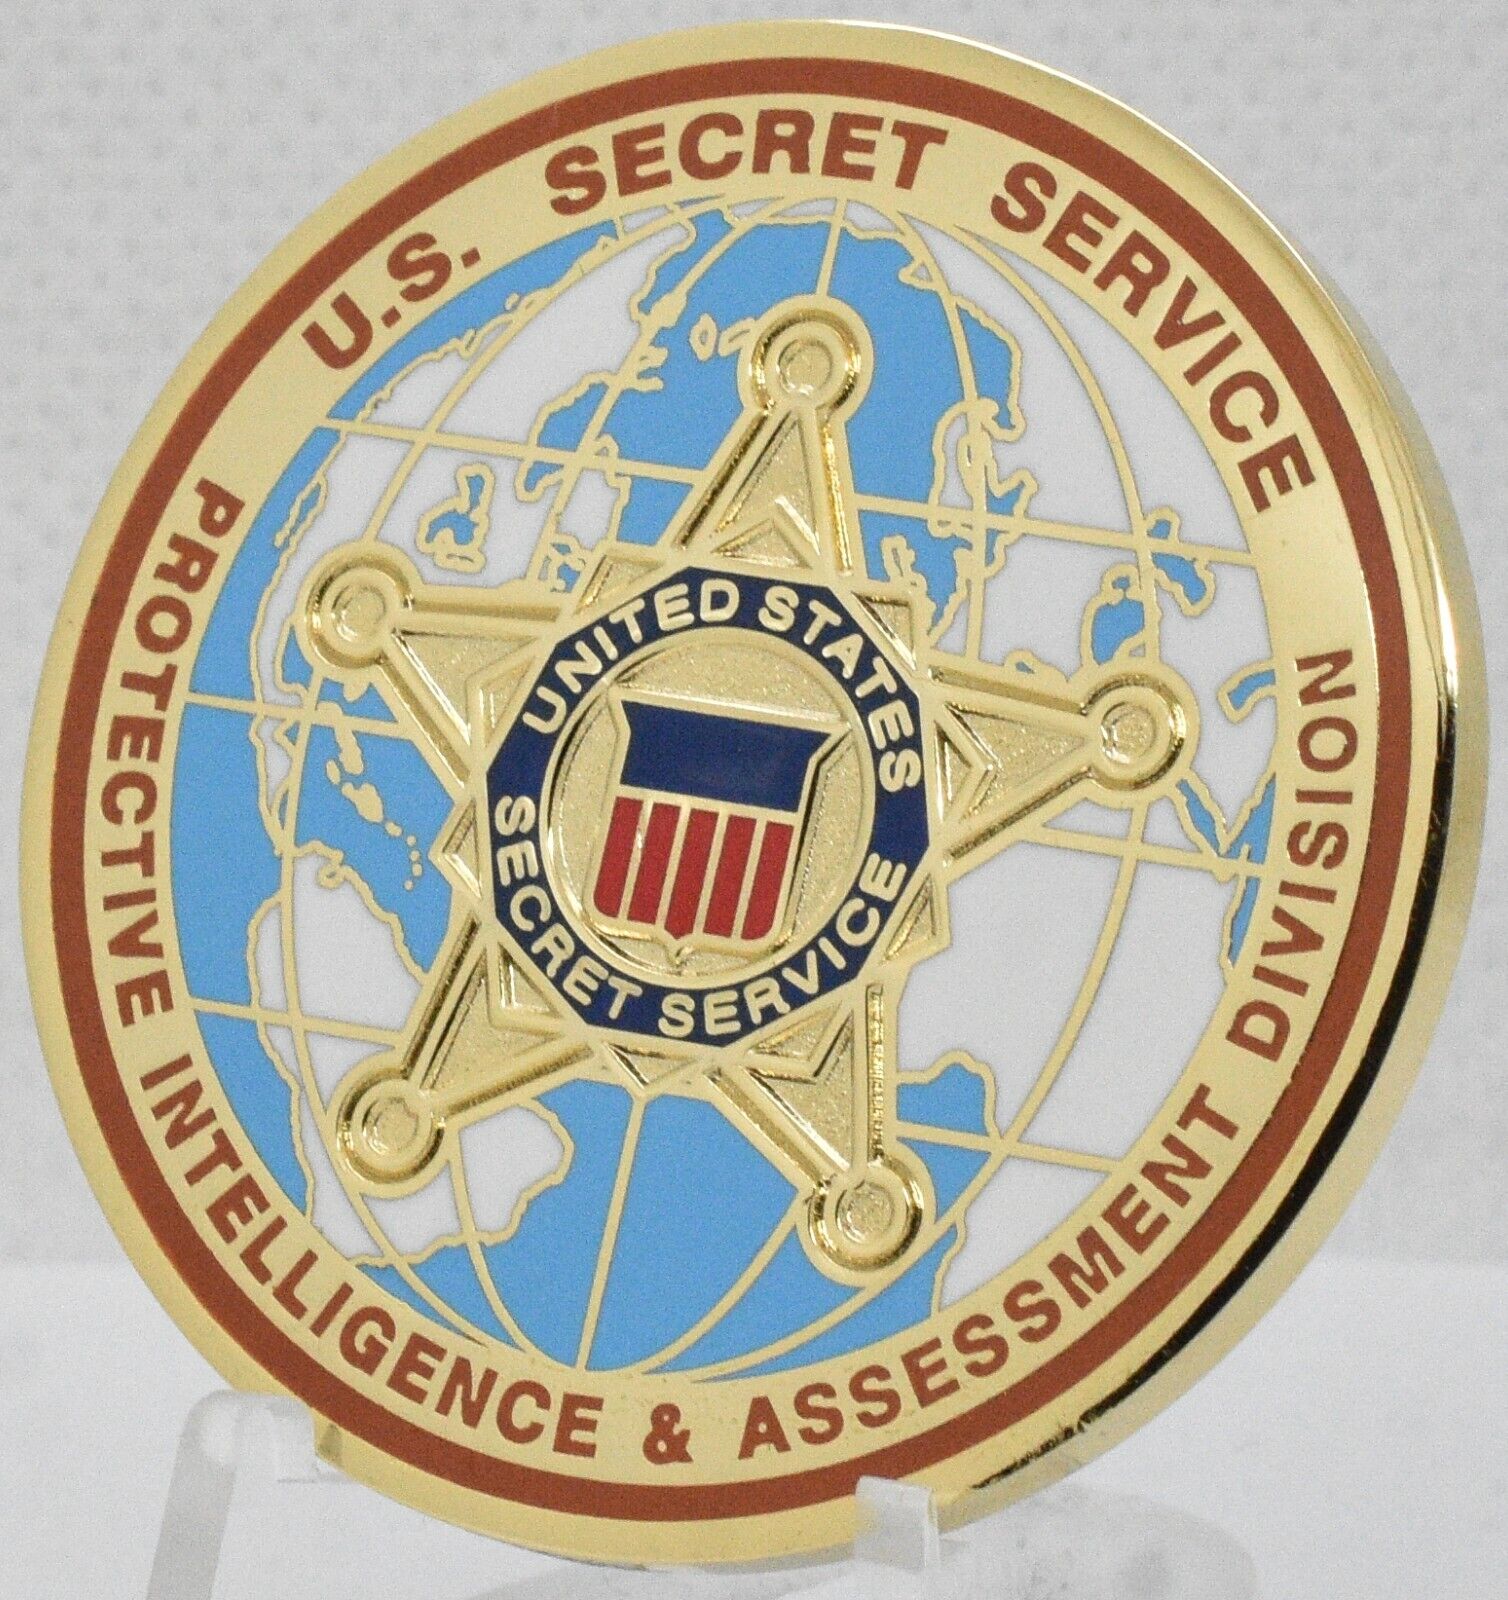 Secret Service Protective Intelligence and Assessment Division Challenge Coin